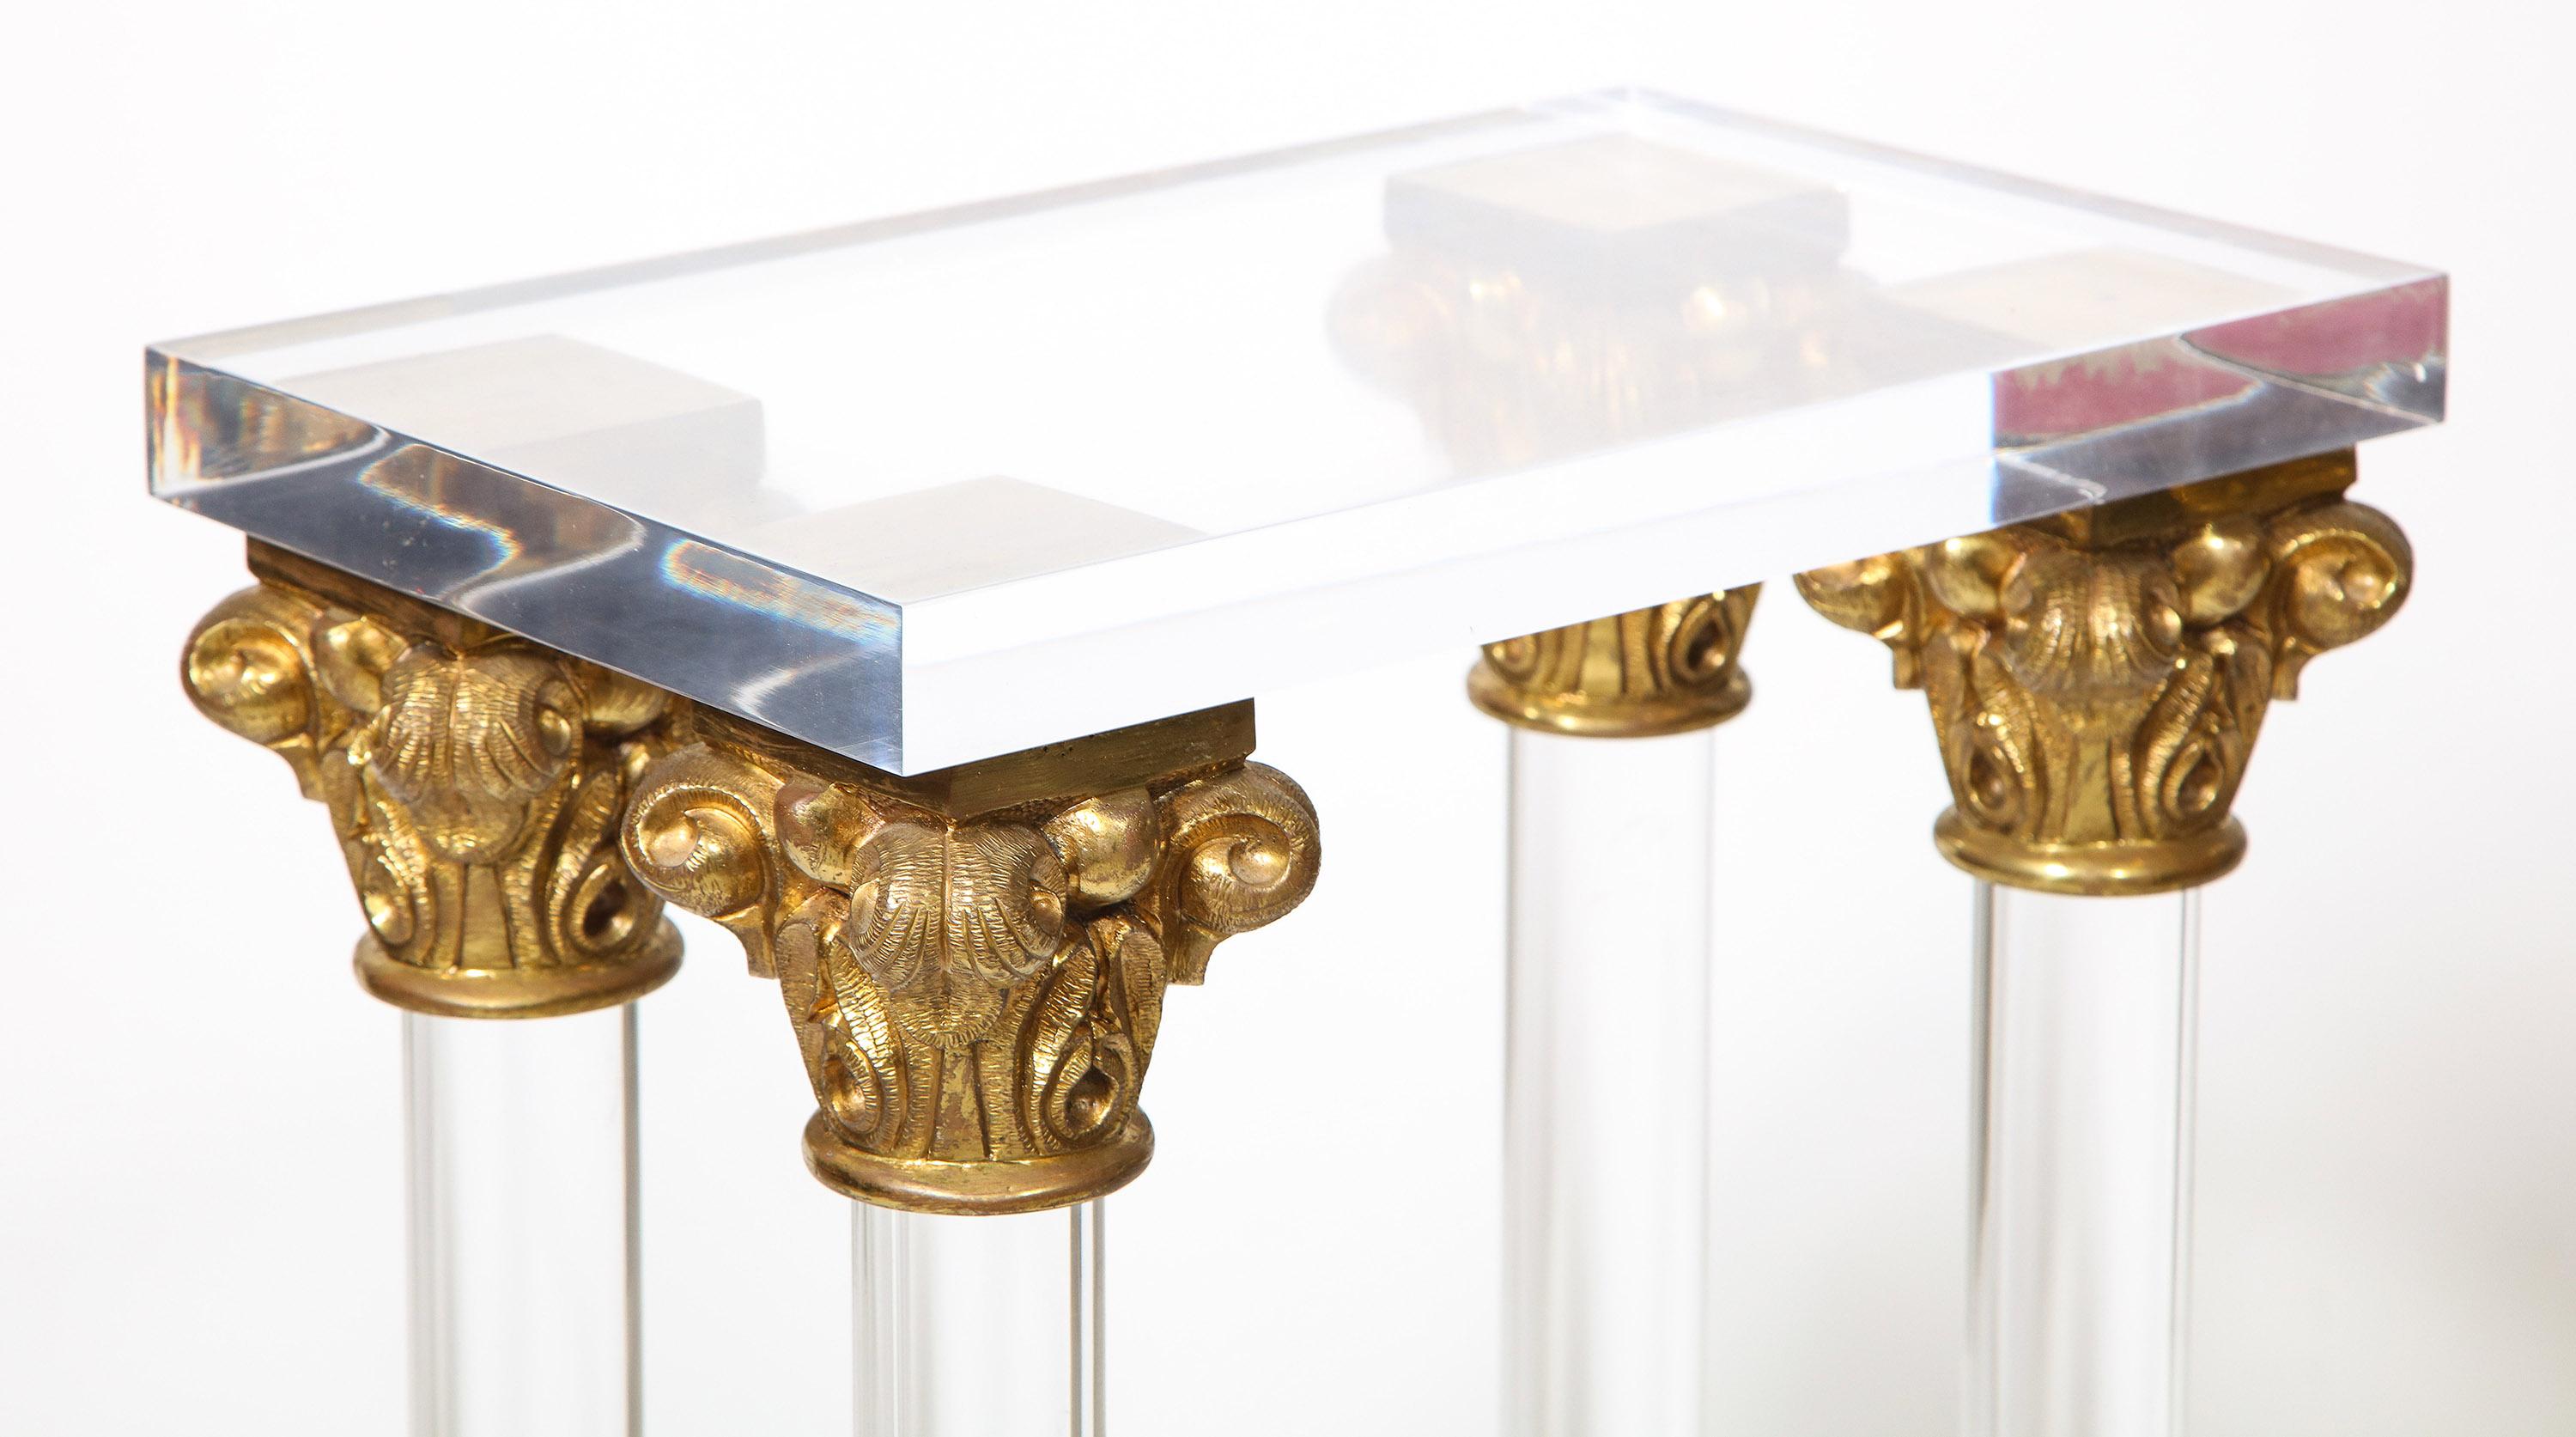 Lucite and bronze console table, Attr: Maison Jansen

The glass topped console supported by two pedestals, each composed of a lucite block base supporting four lucite columns with finely cast bronze Corinthian capitals at top and a bronze stepped